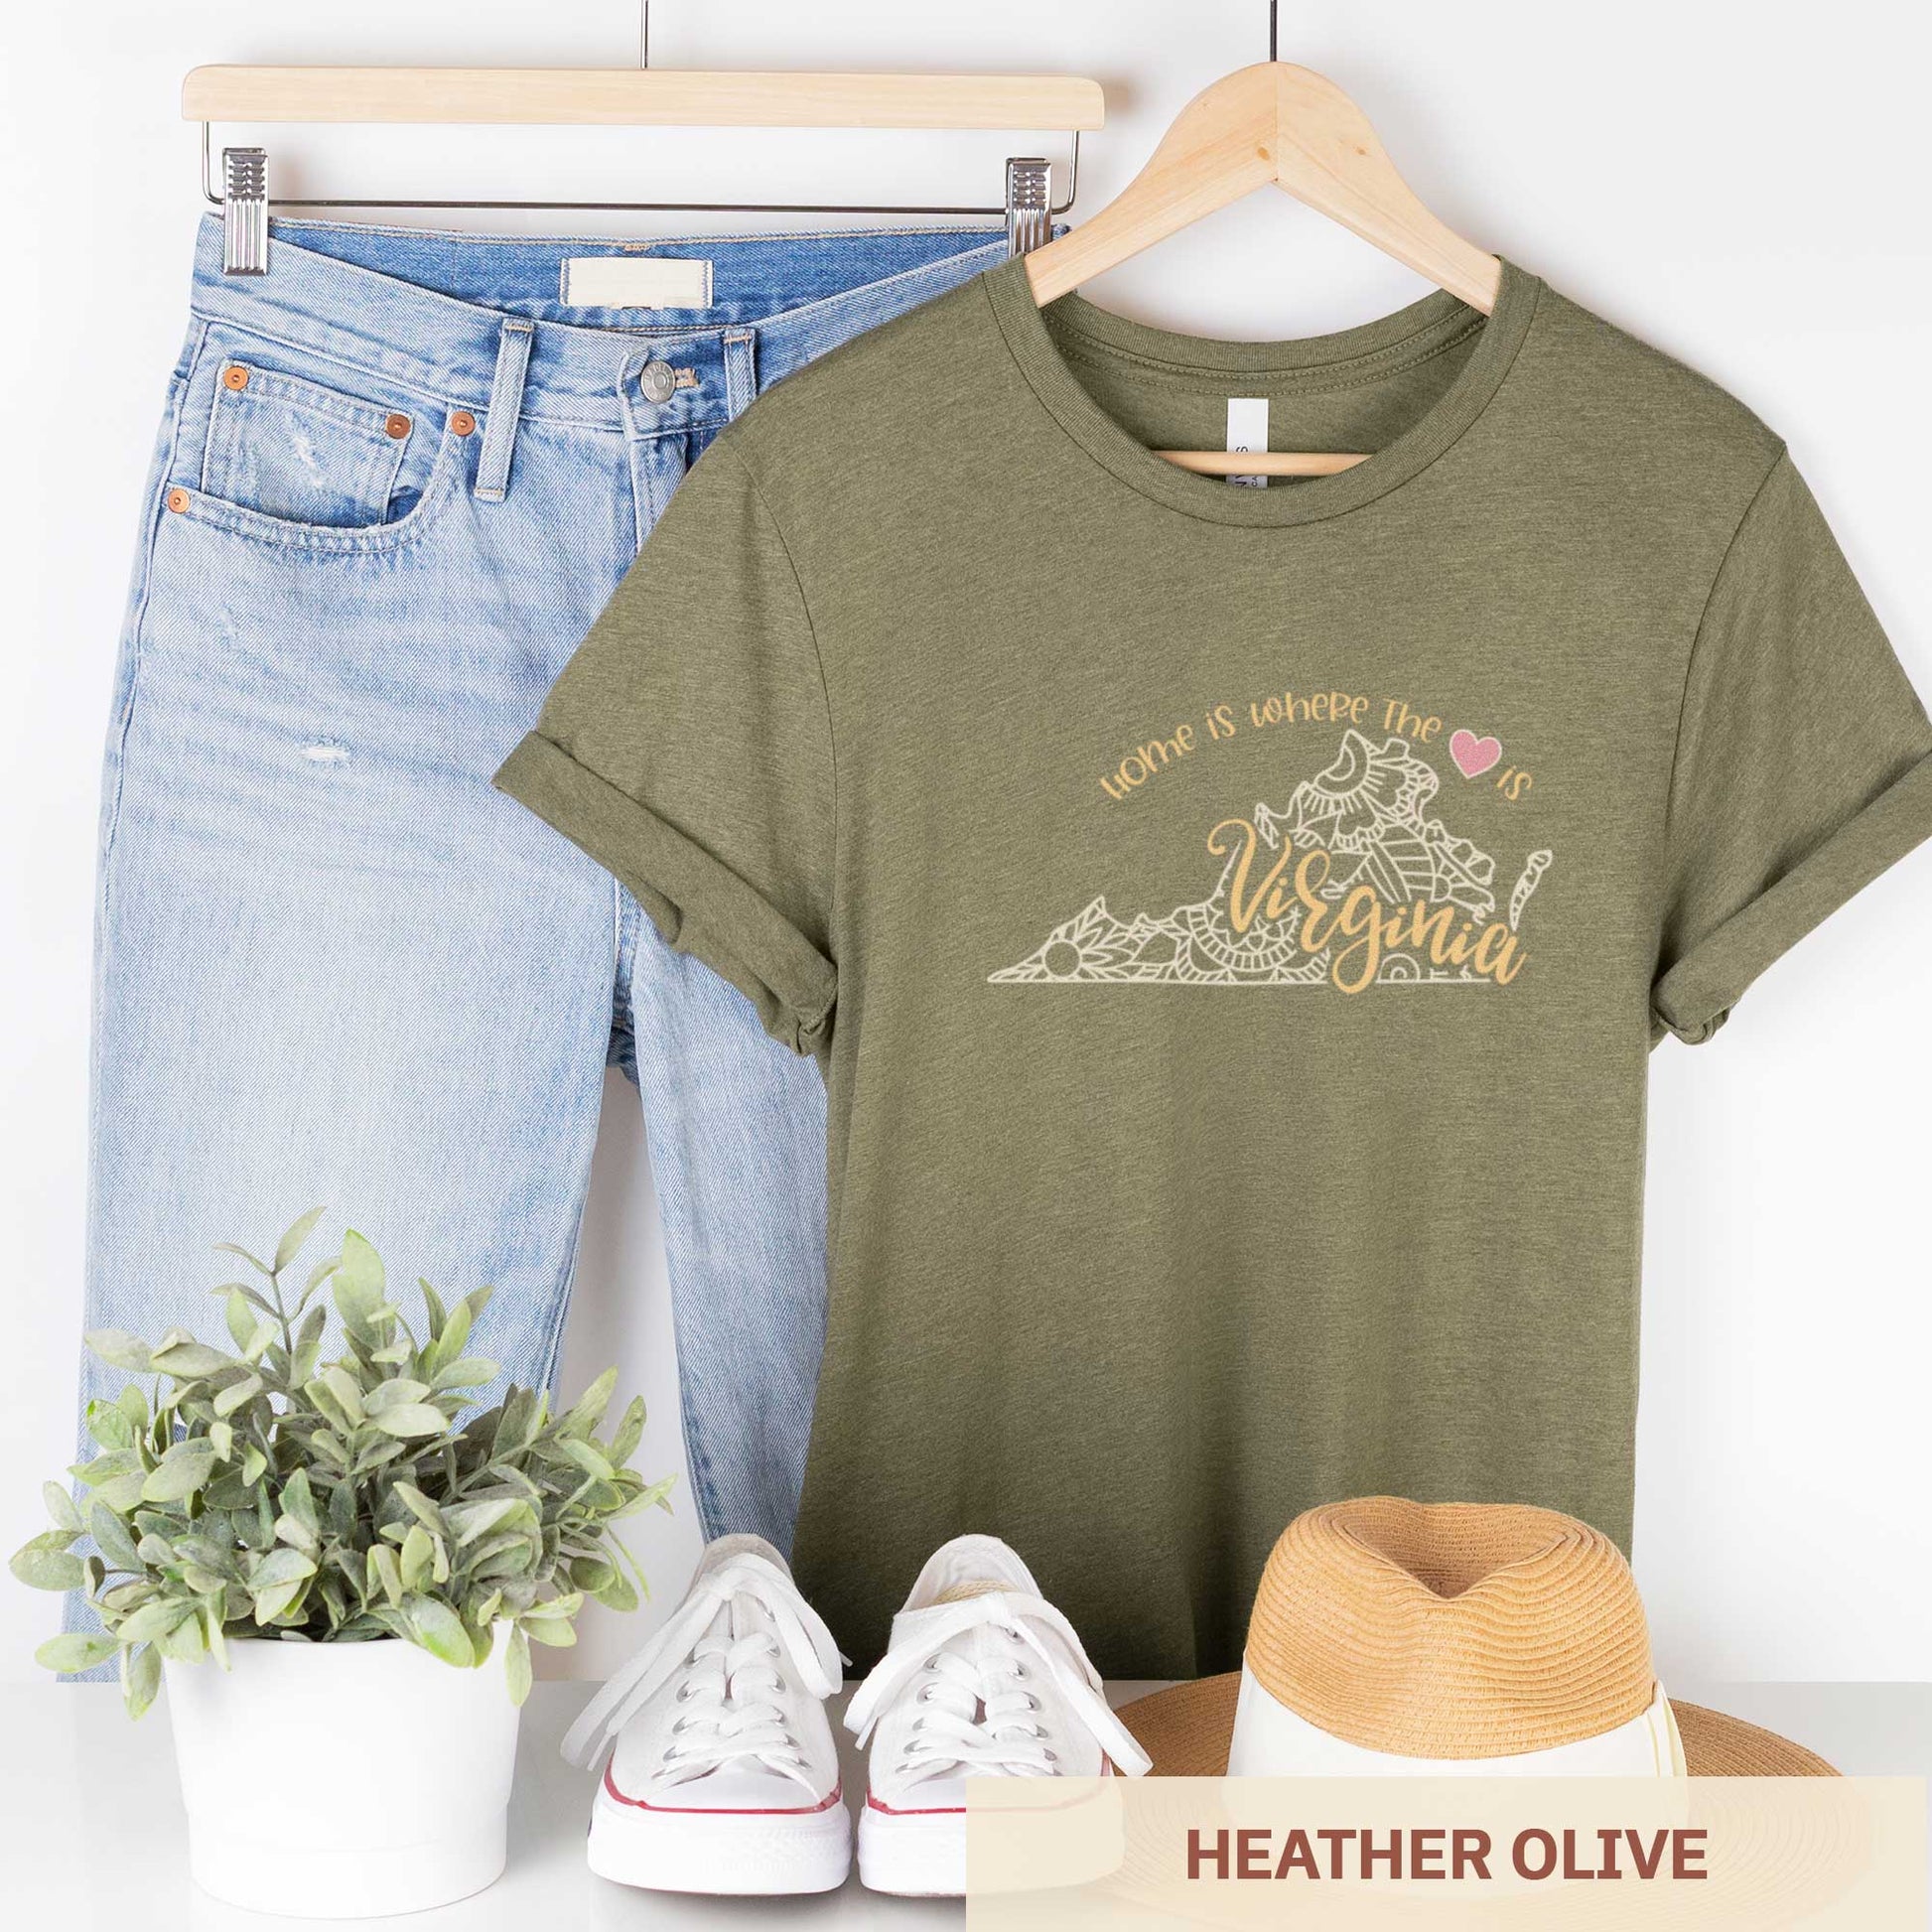 A hanging heather olive Bella Canvas t-shirt featuring a mandala in the shape of Virginia with the words home is where the heart is.